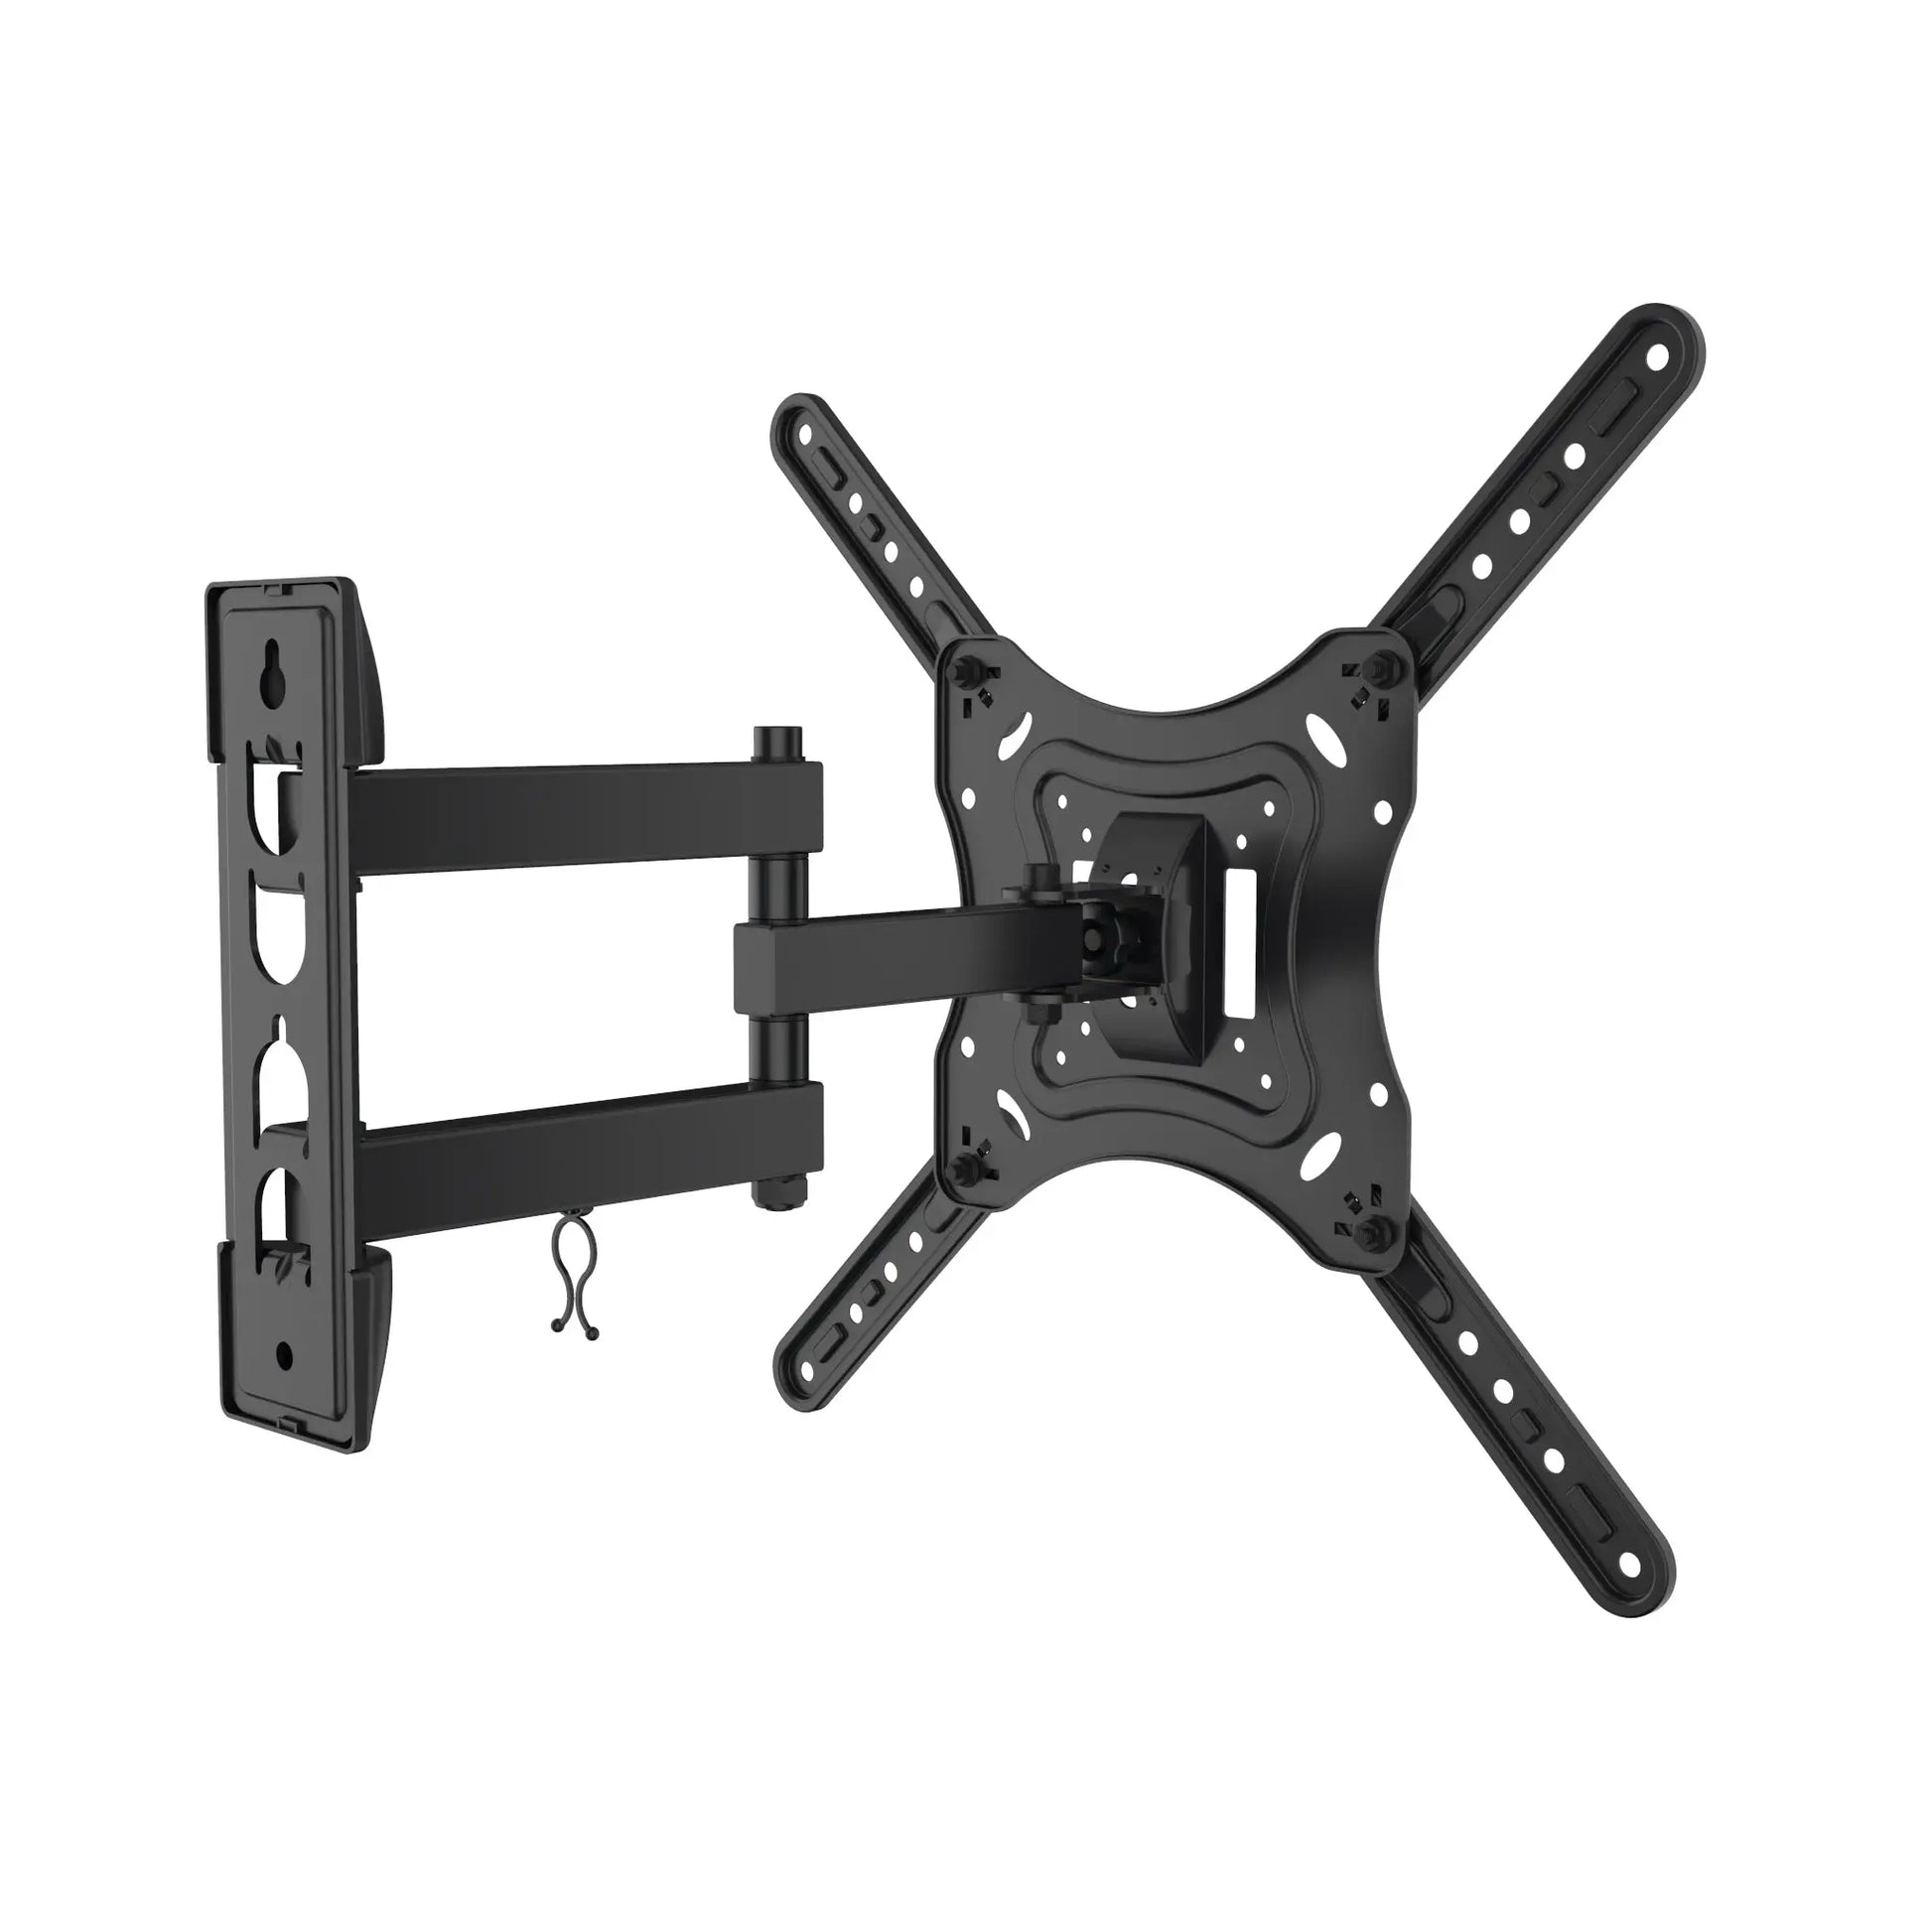 Full Motion / Articulating TV Wall Mount For 32" to 55" TVs up to 66lbs (MA4402-E) freeshipping - One Products